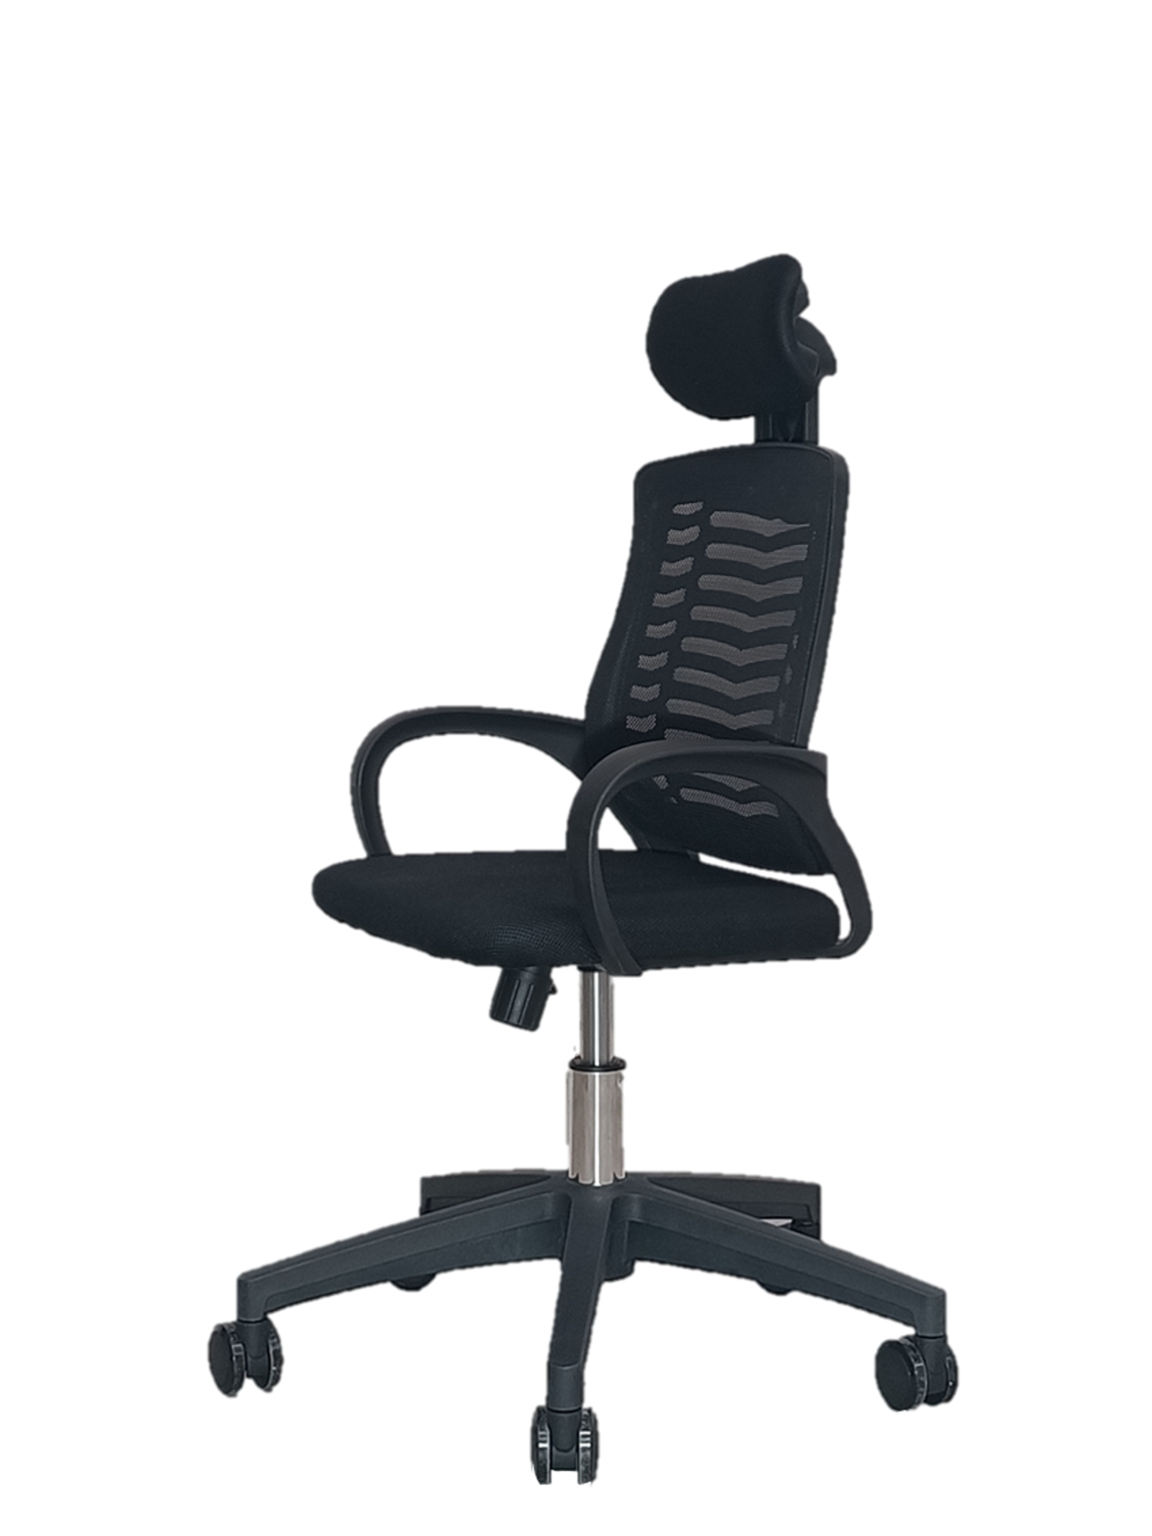 Mesh chair with Neck Rest